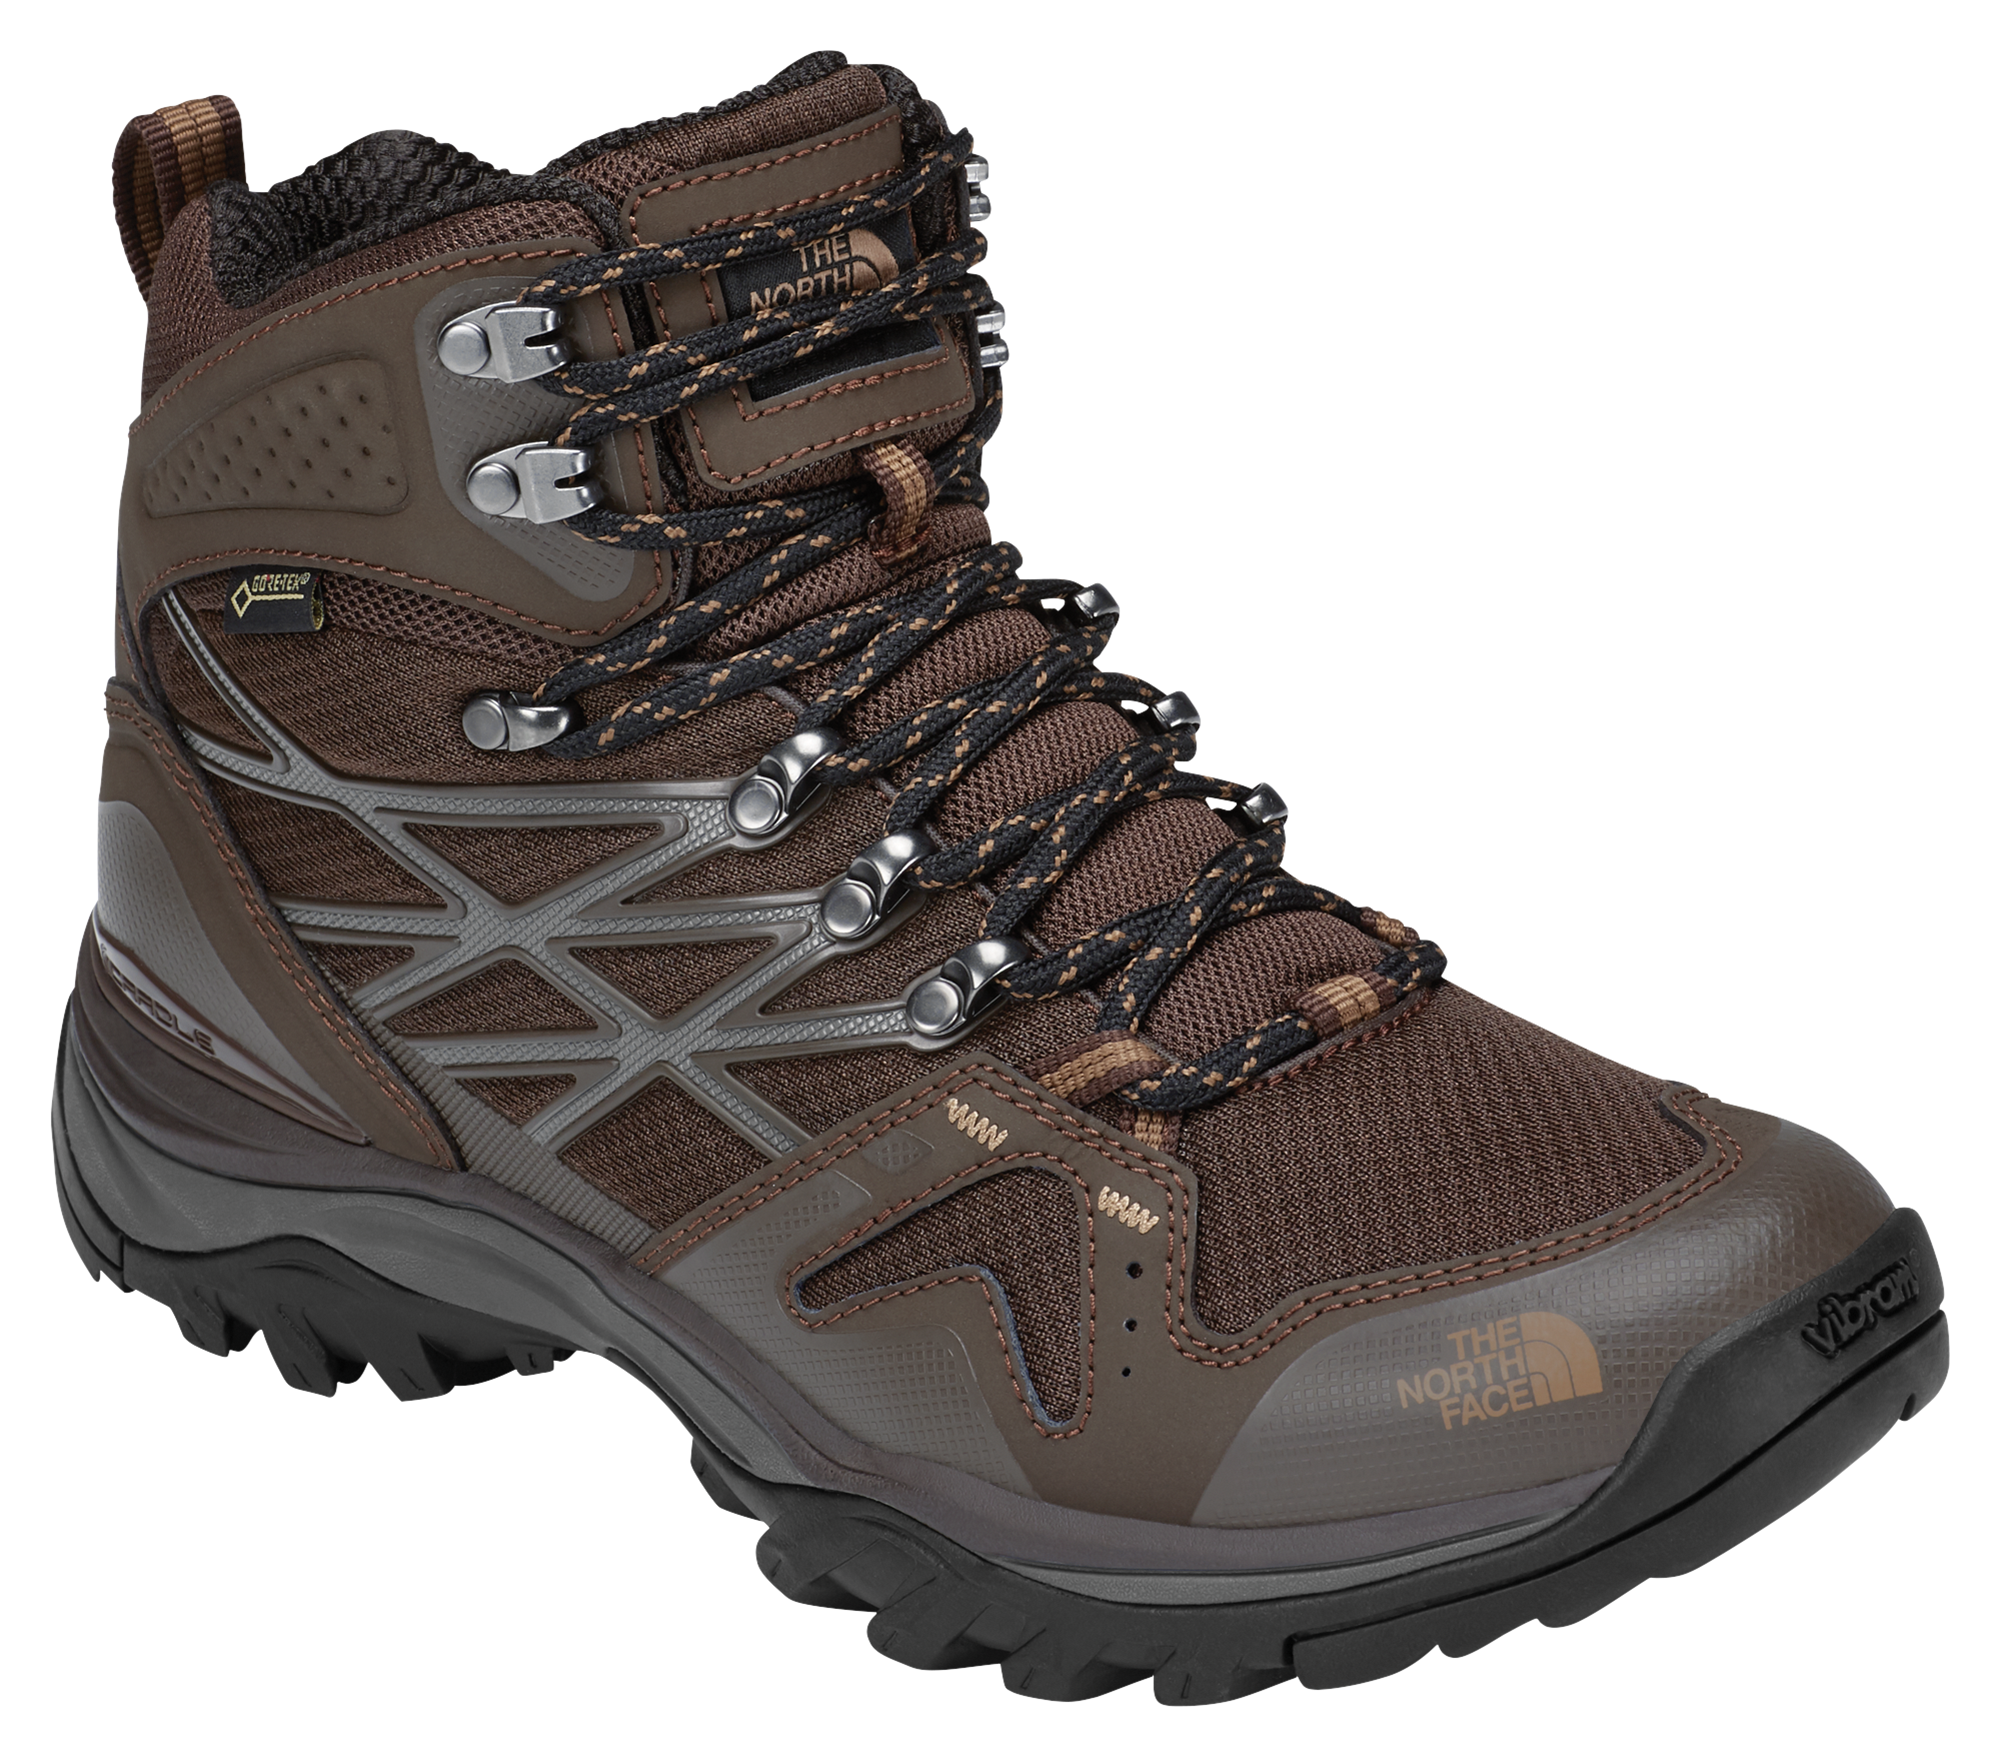 The North Face Hedgehog Fastpack Mid GTX GORE-TEX Hiking Boots for Men